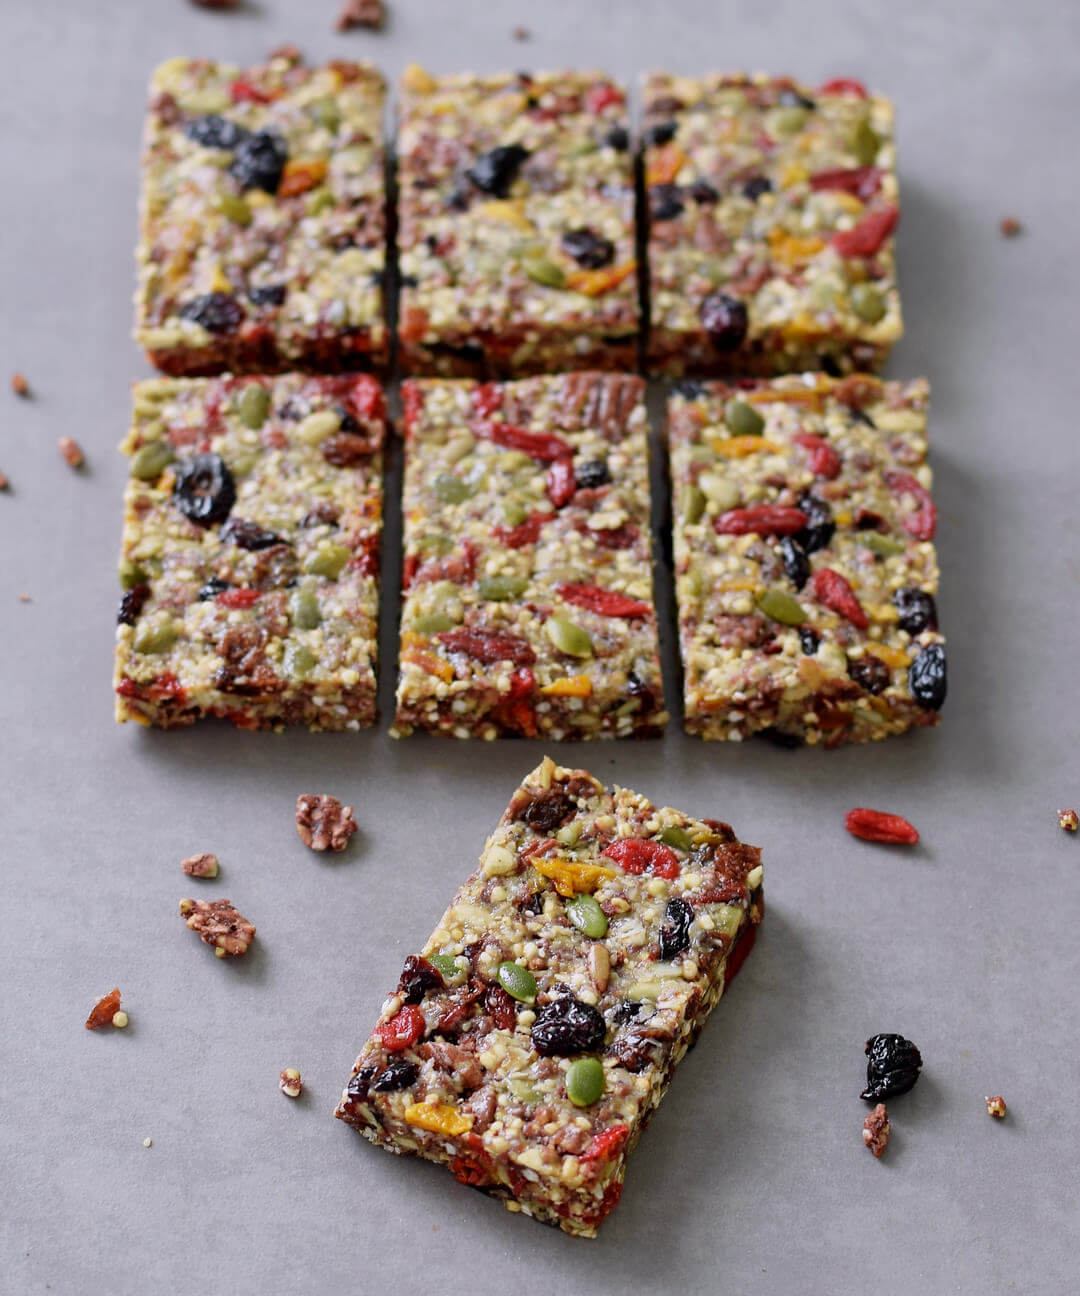 Healthy granola bars recipe. These muesli bars are chewy, soft and the perfect snack. My recipe is (raw) vegan, gluten free, refined sugar-free, healthy and easy to make